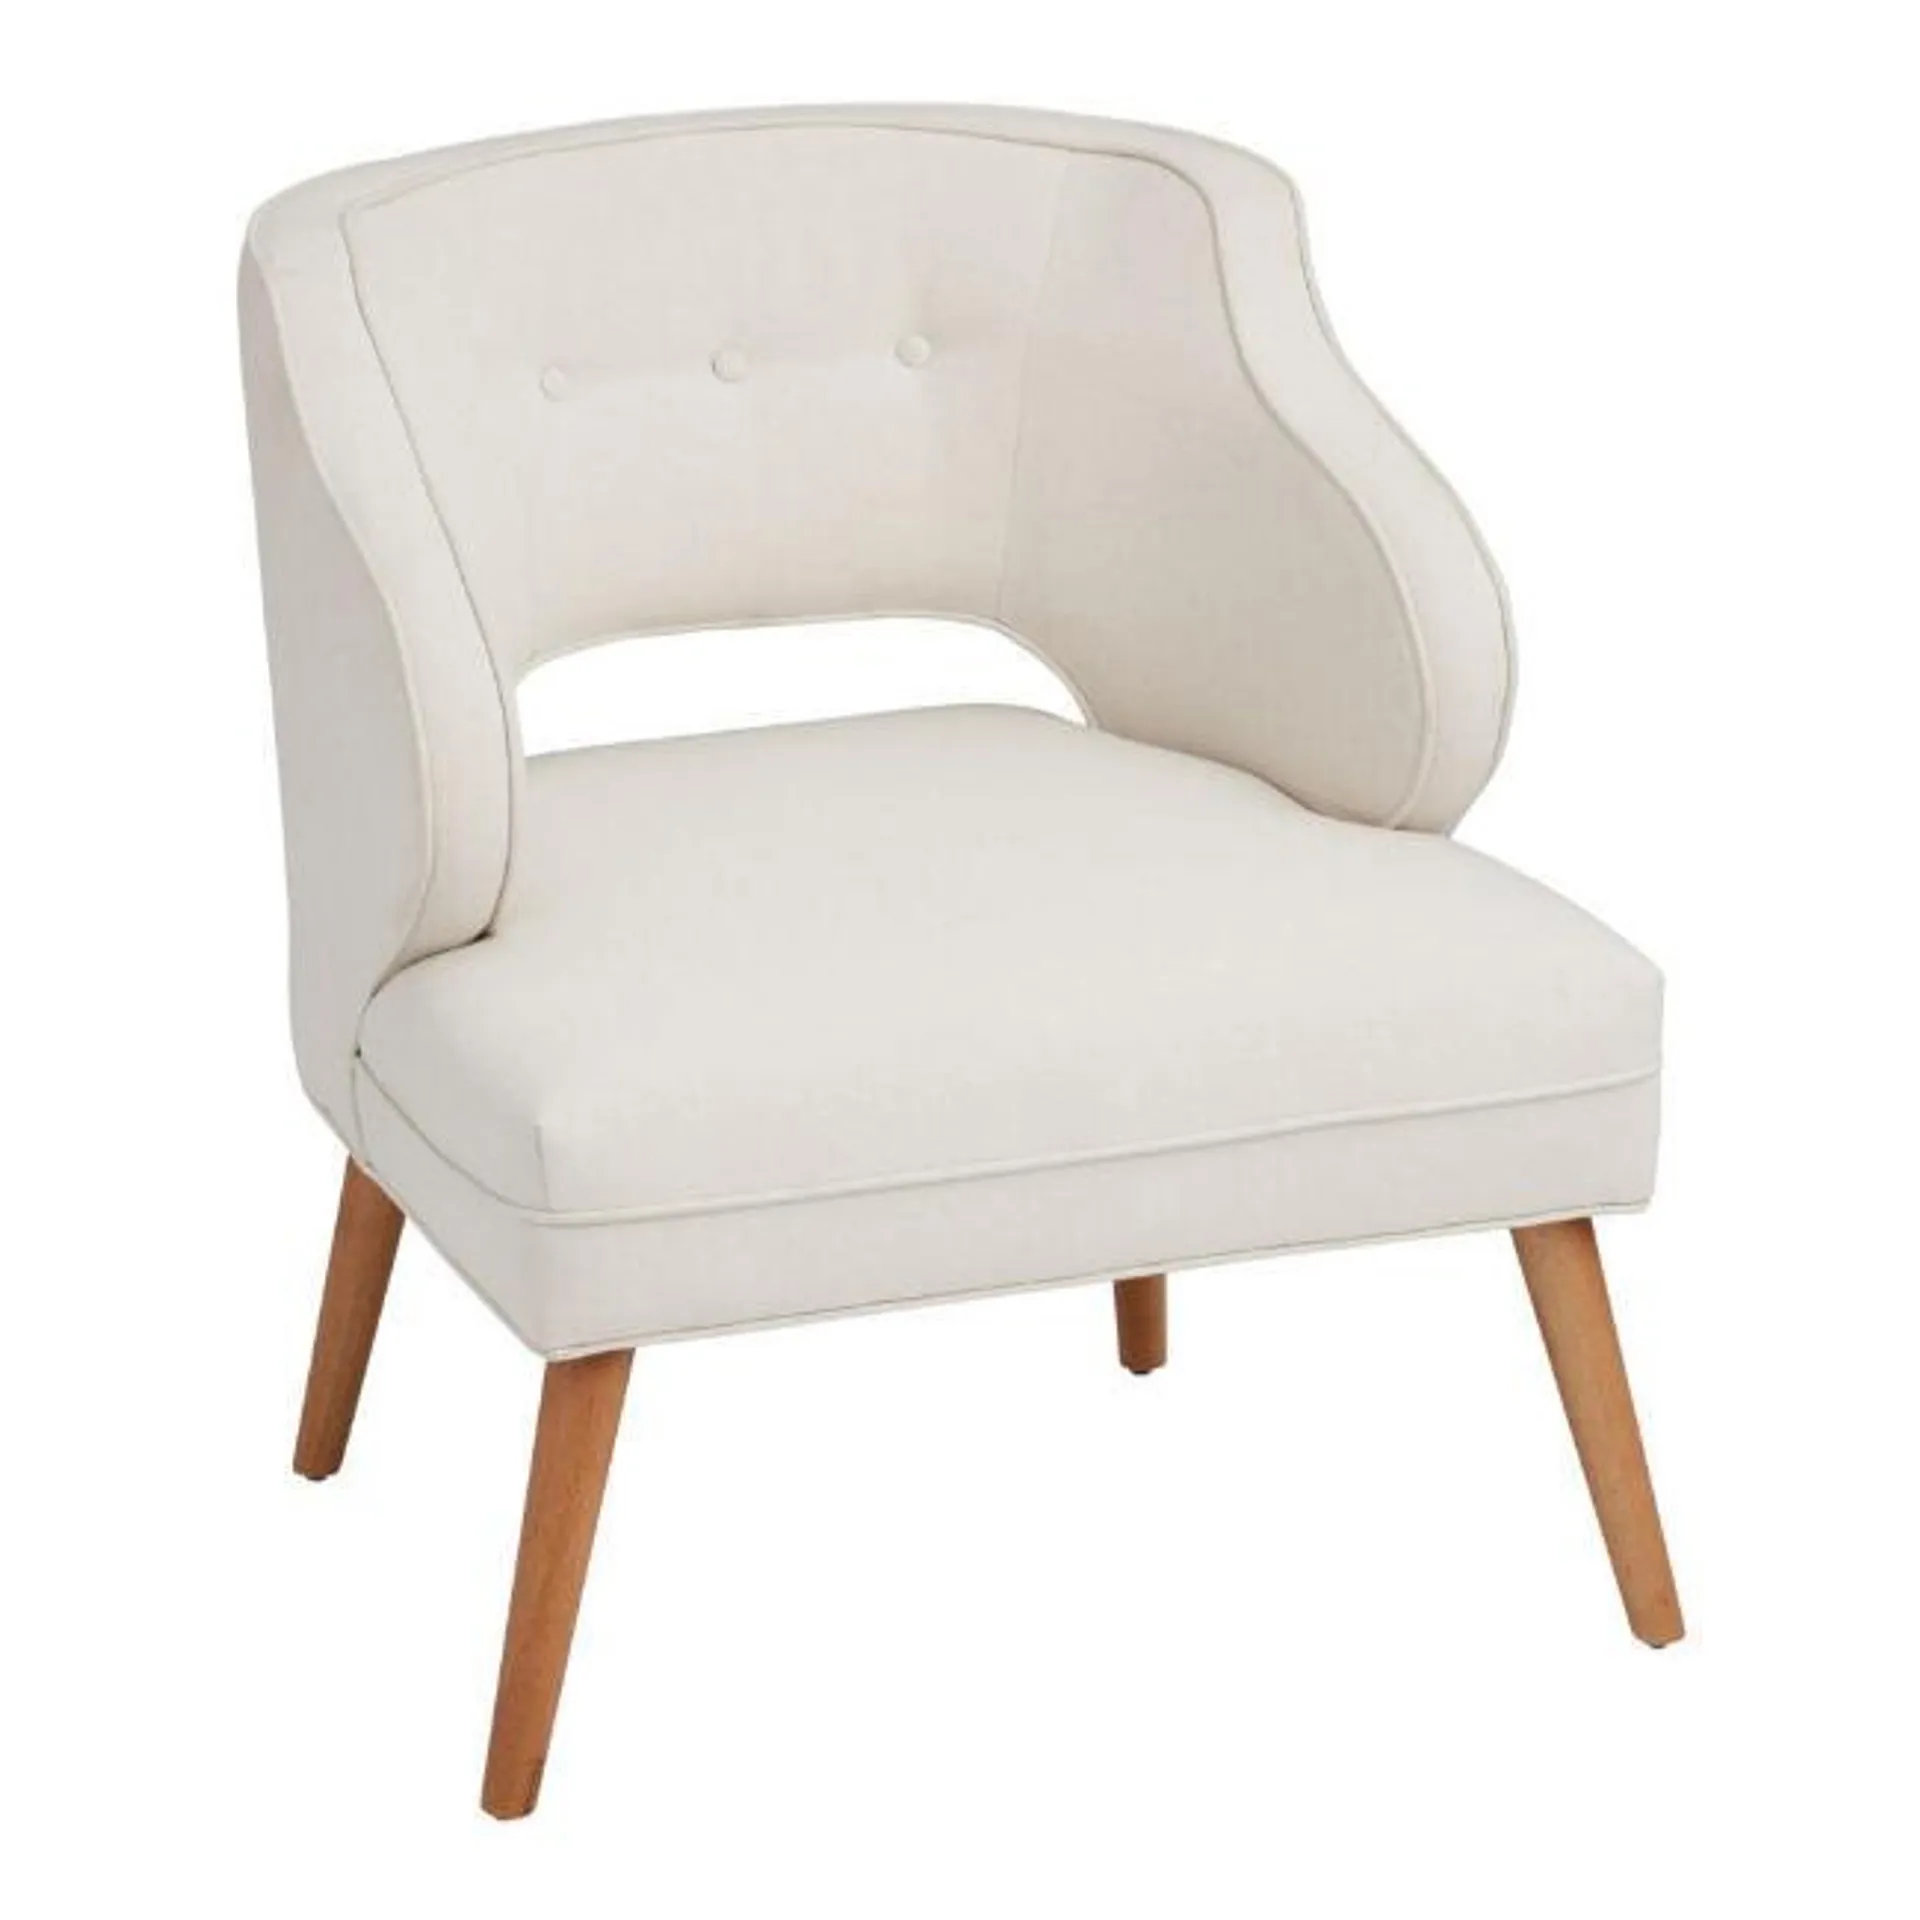 Tyley Upholstered Chair